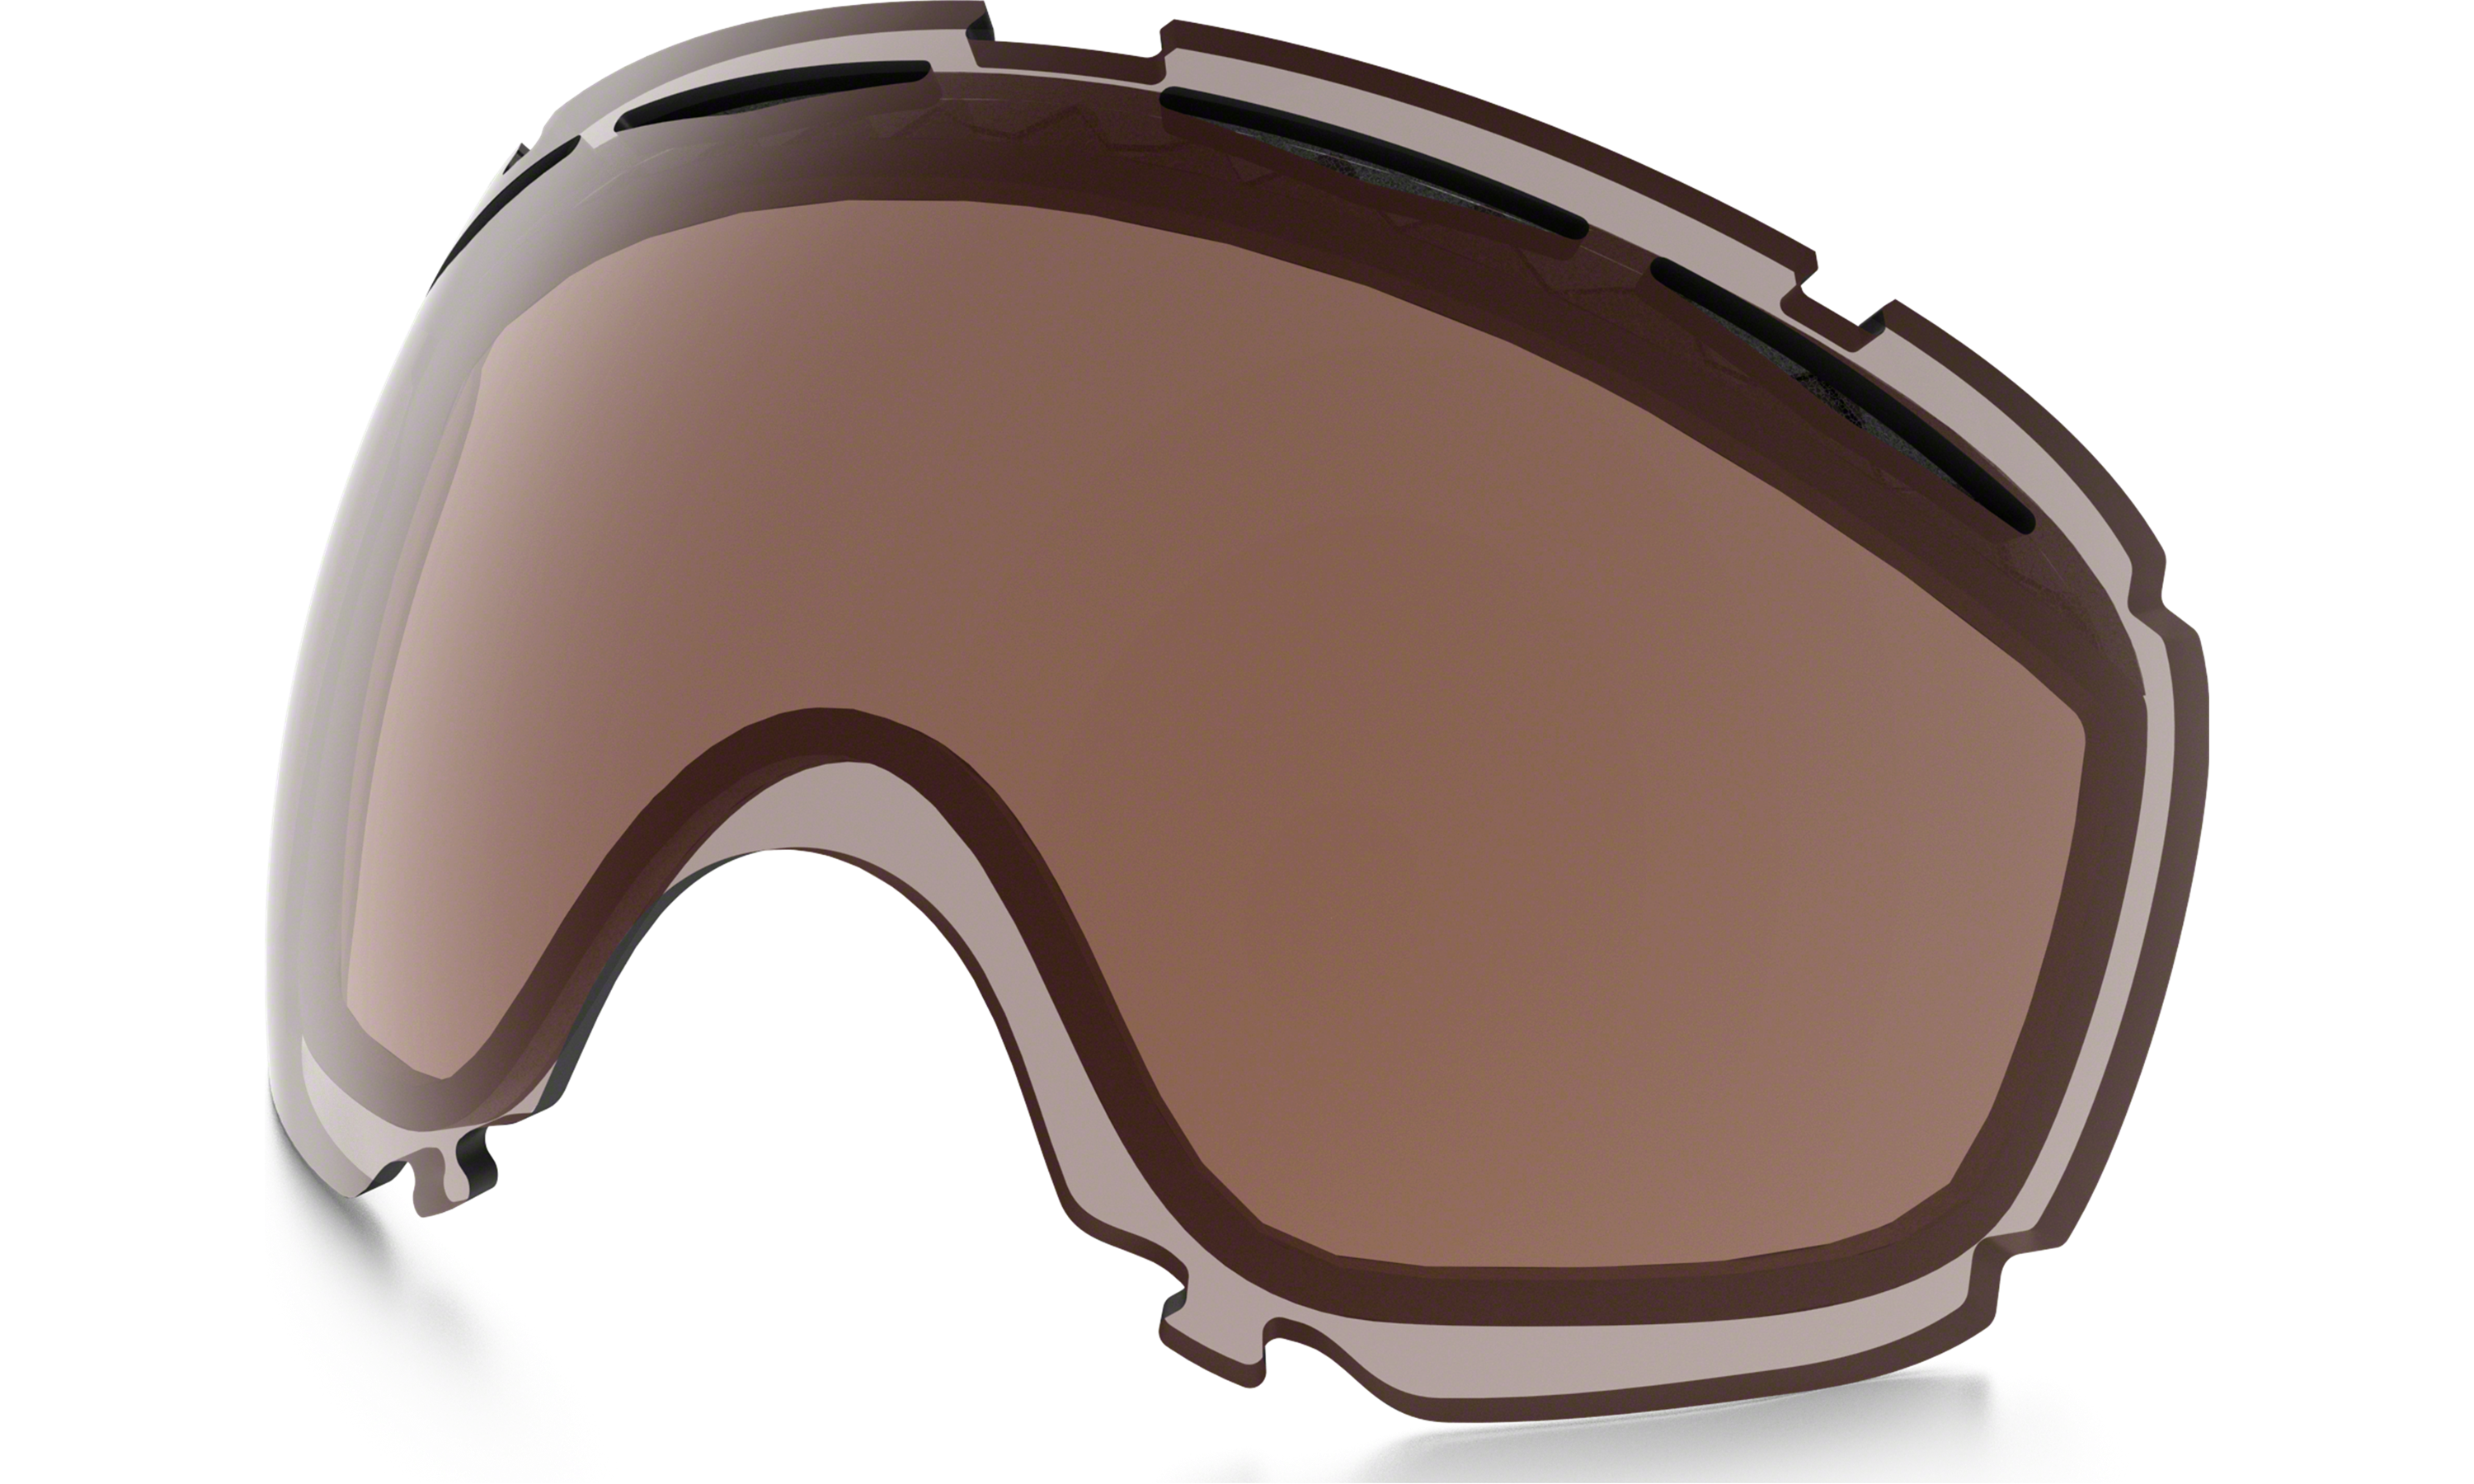 oakley canopy replacement lenses